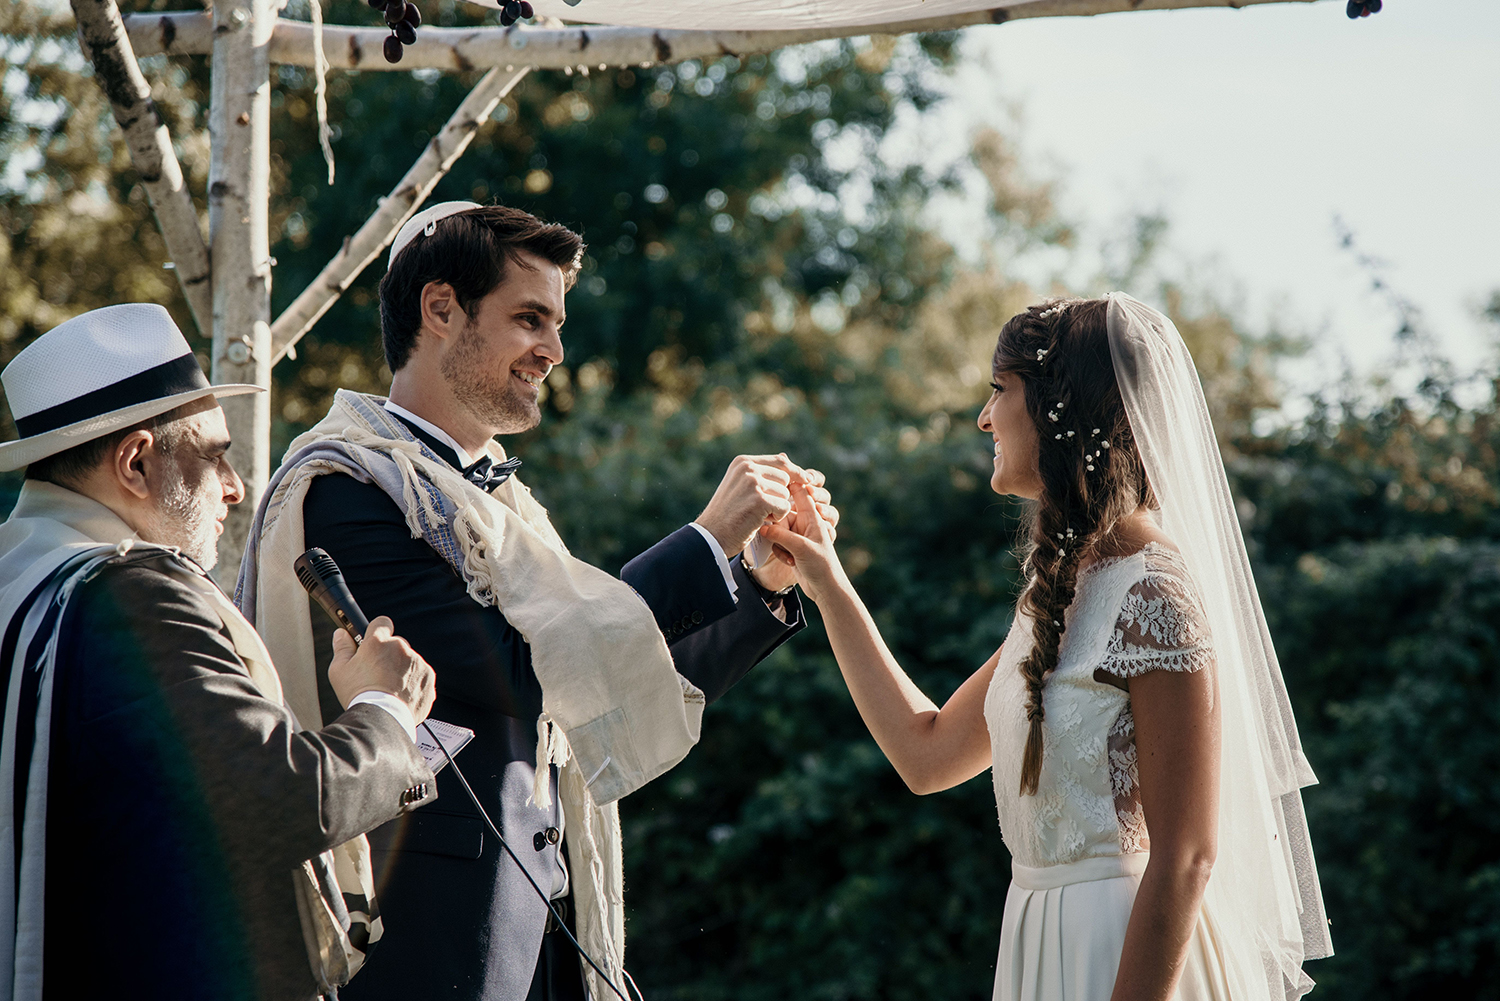 Wedding photographer in provence